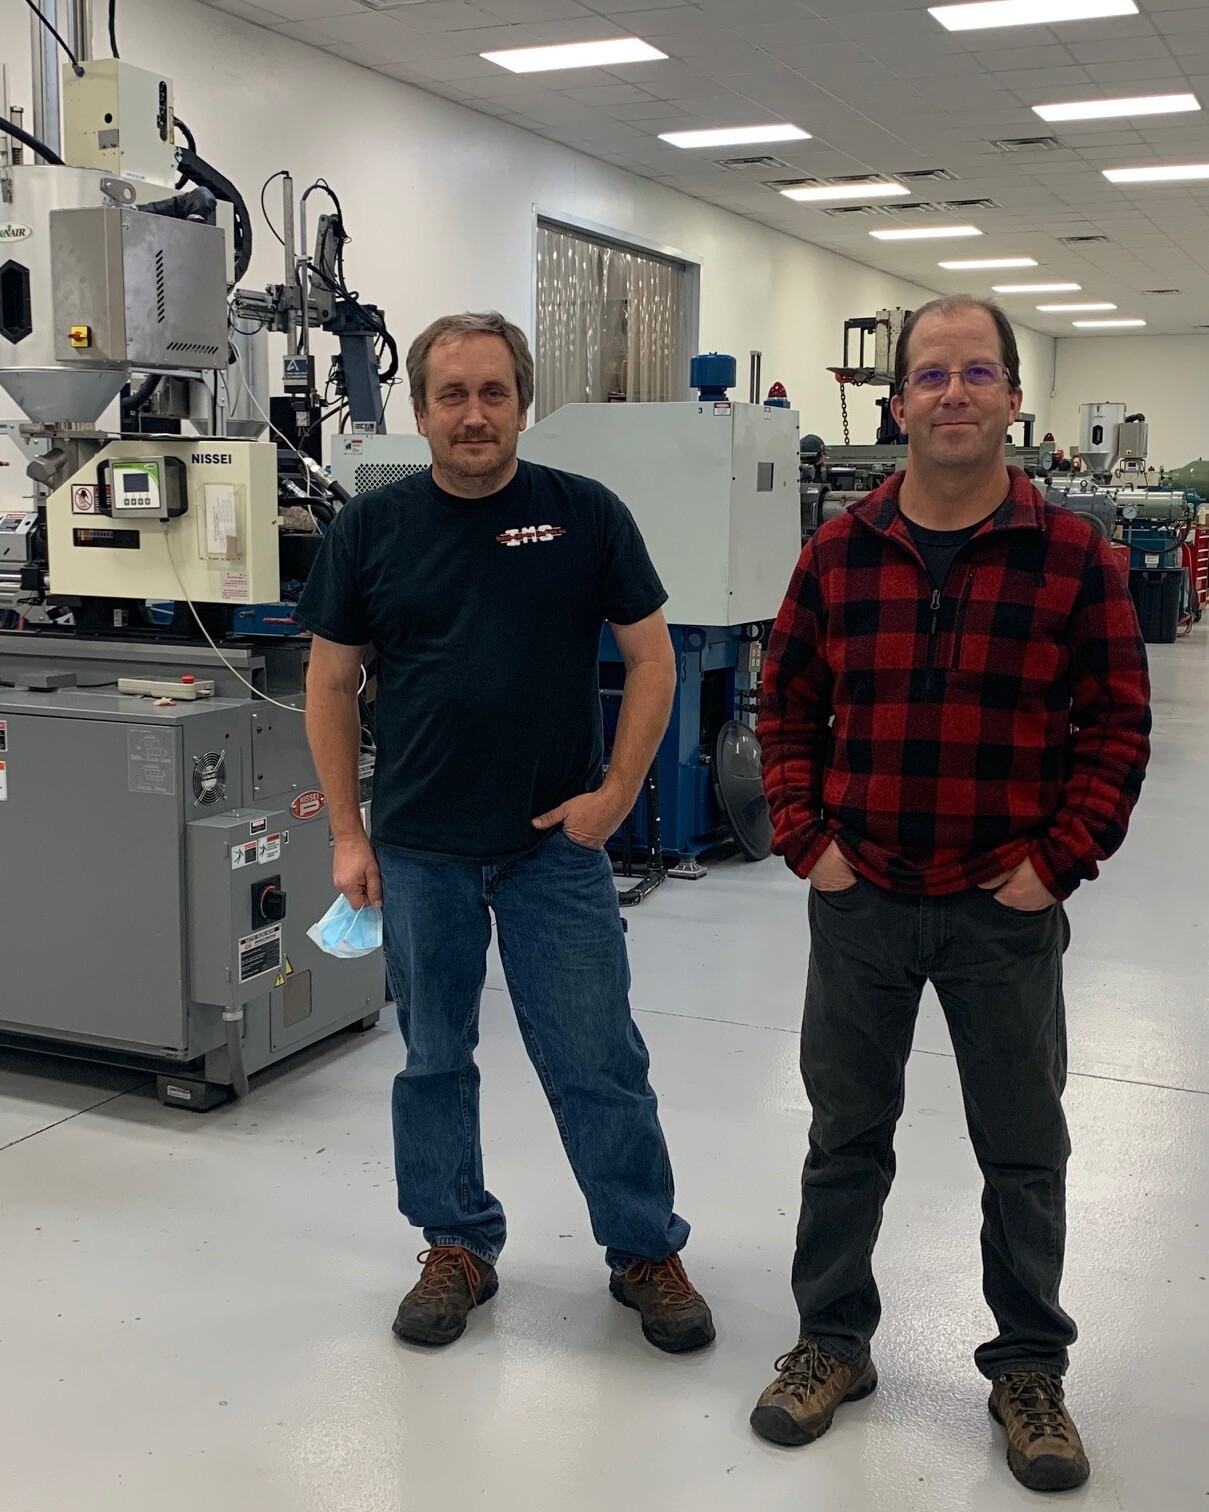 Former owners of Injection Molding Solutions